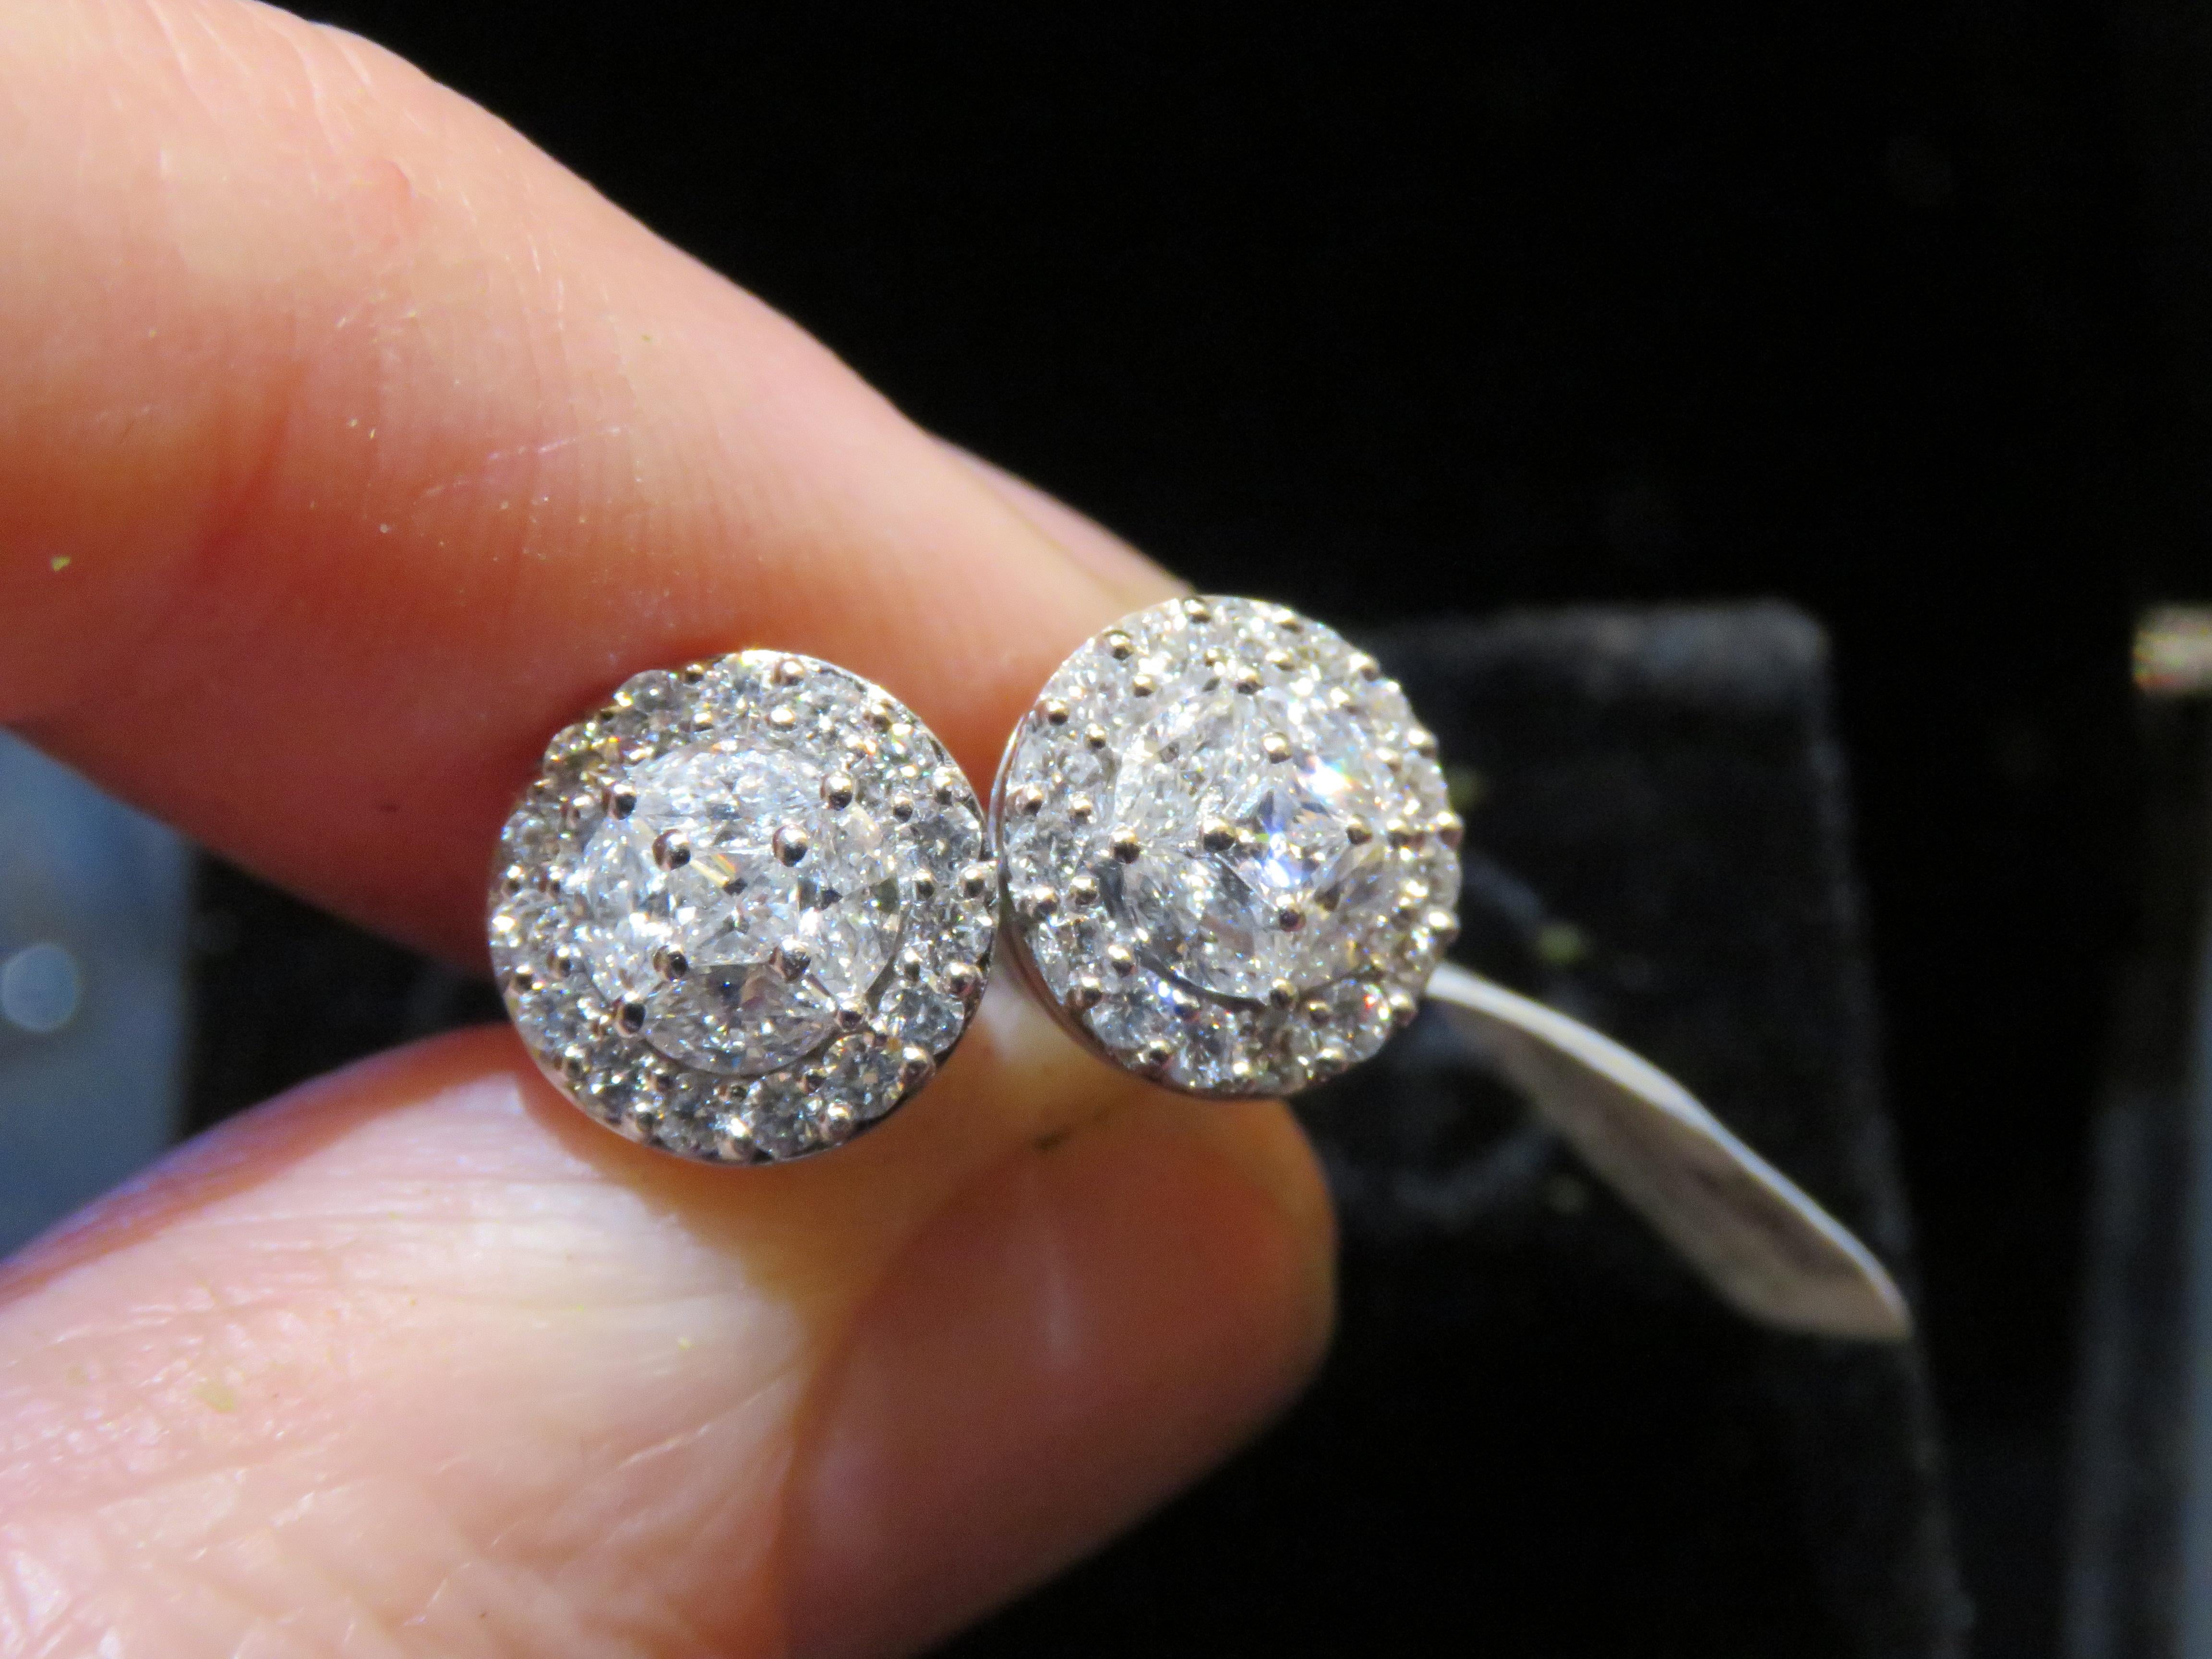 The Following Items we are offering is a Rare Important Radiant 18KT White Gold Stunning Diamond Round Halo Stud Earrings. Earrings feature Magnificent Rare Sparkling Fine Glittering Fancy Shaped Diamonds!! T.C.W. Approx over 1CT!!! These Gorgeous